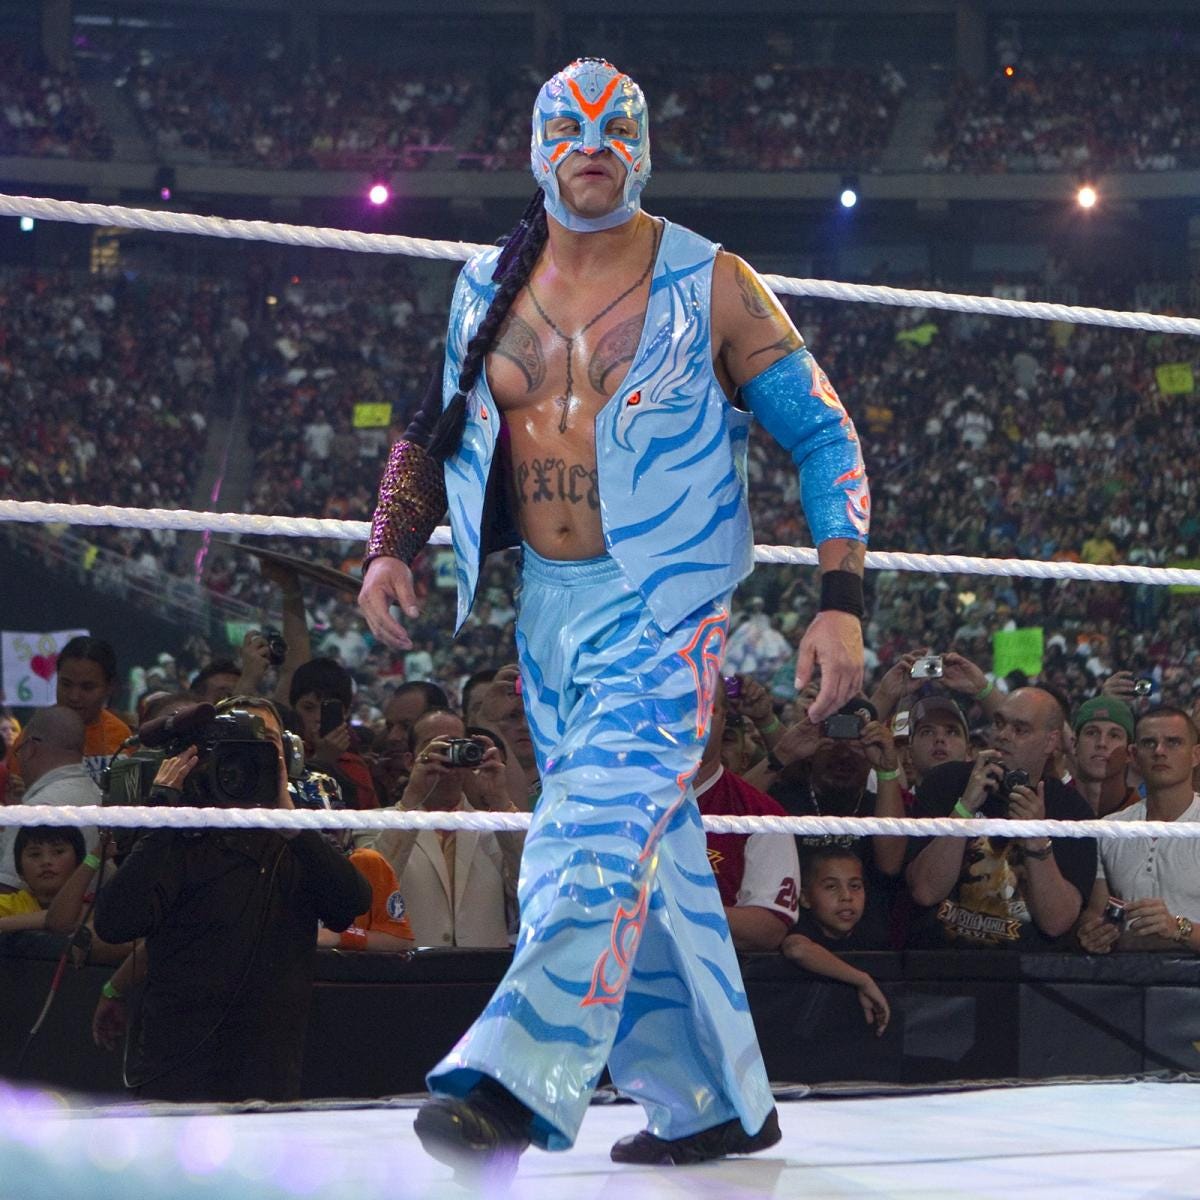 Just a reminder that at WrestleMania 26, Rey Mysterio dressed in tribute to  the hit film Avatar. : r/SquaredCircle